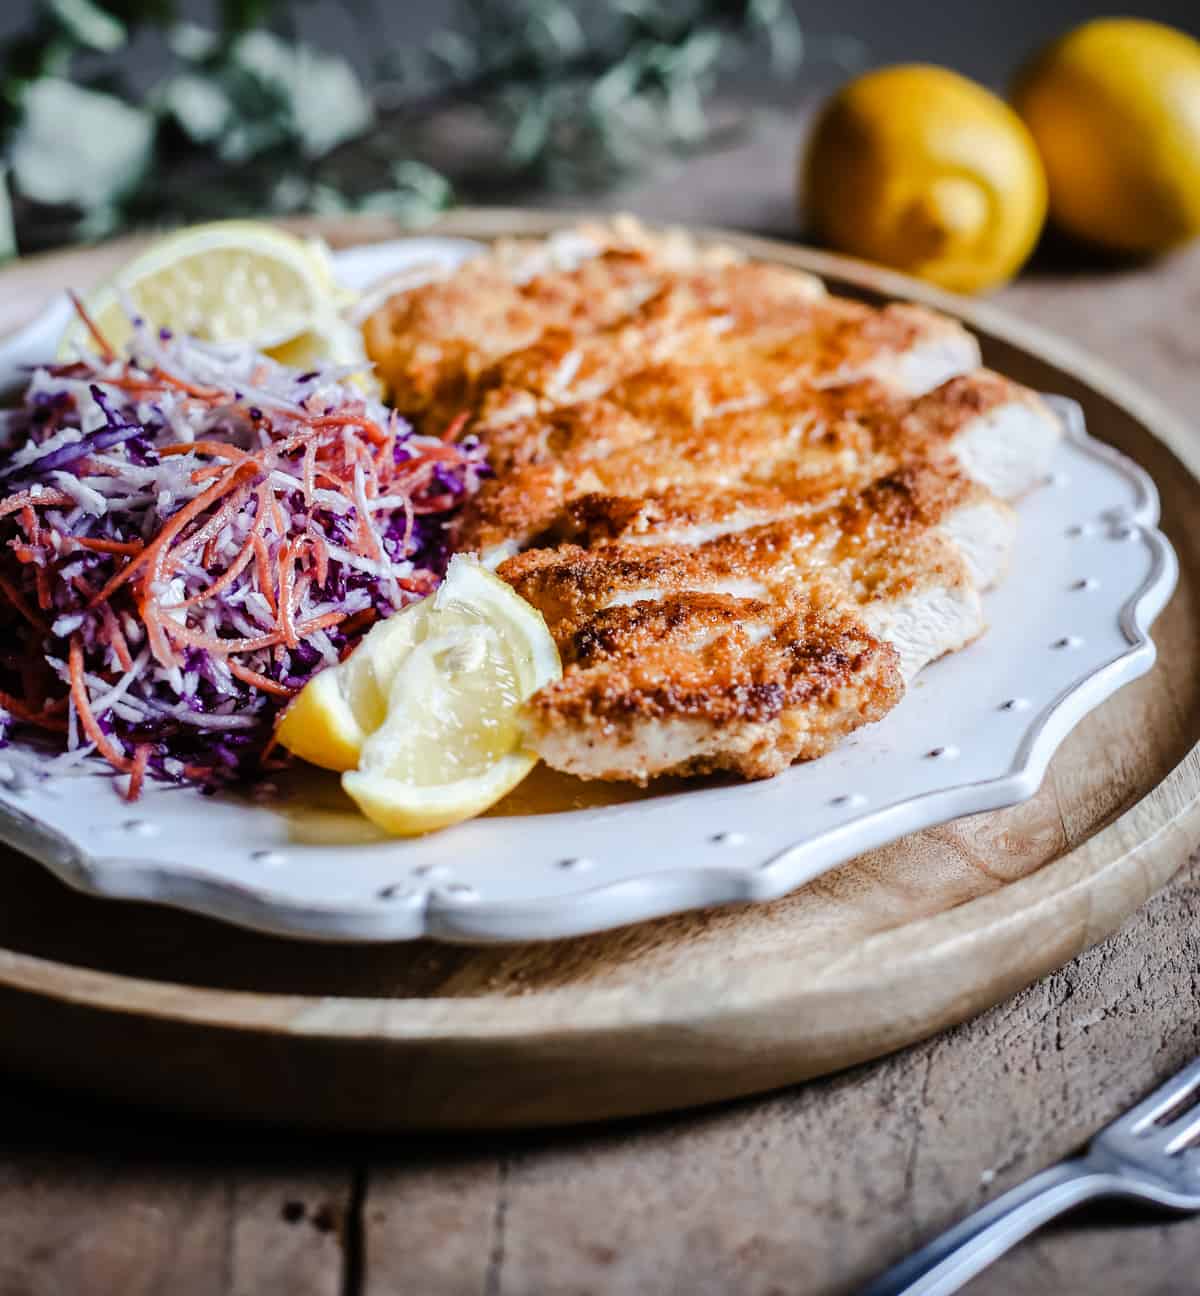 side view of Plate of Gluten-Free Chicken Schnitzel with coleslaw and lemon